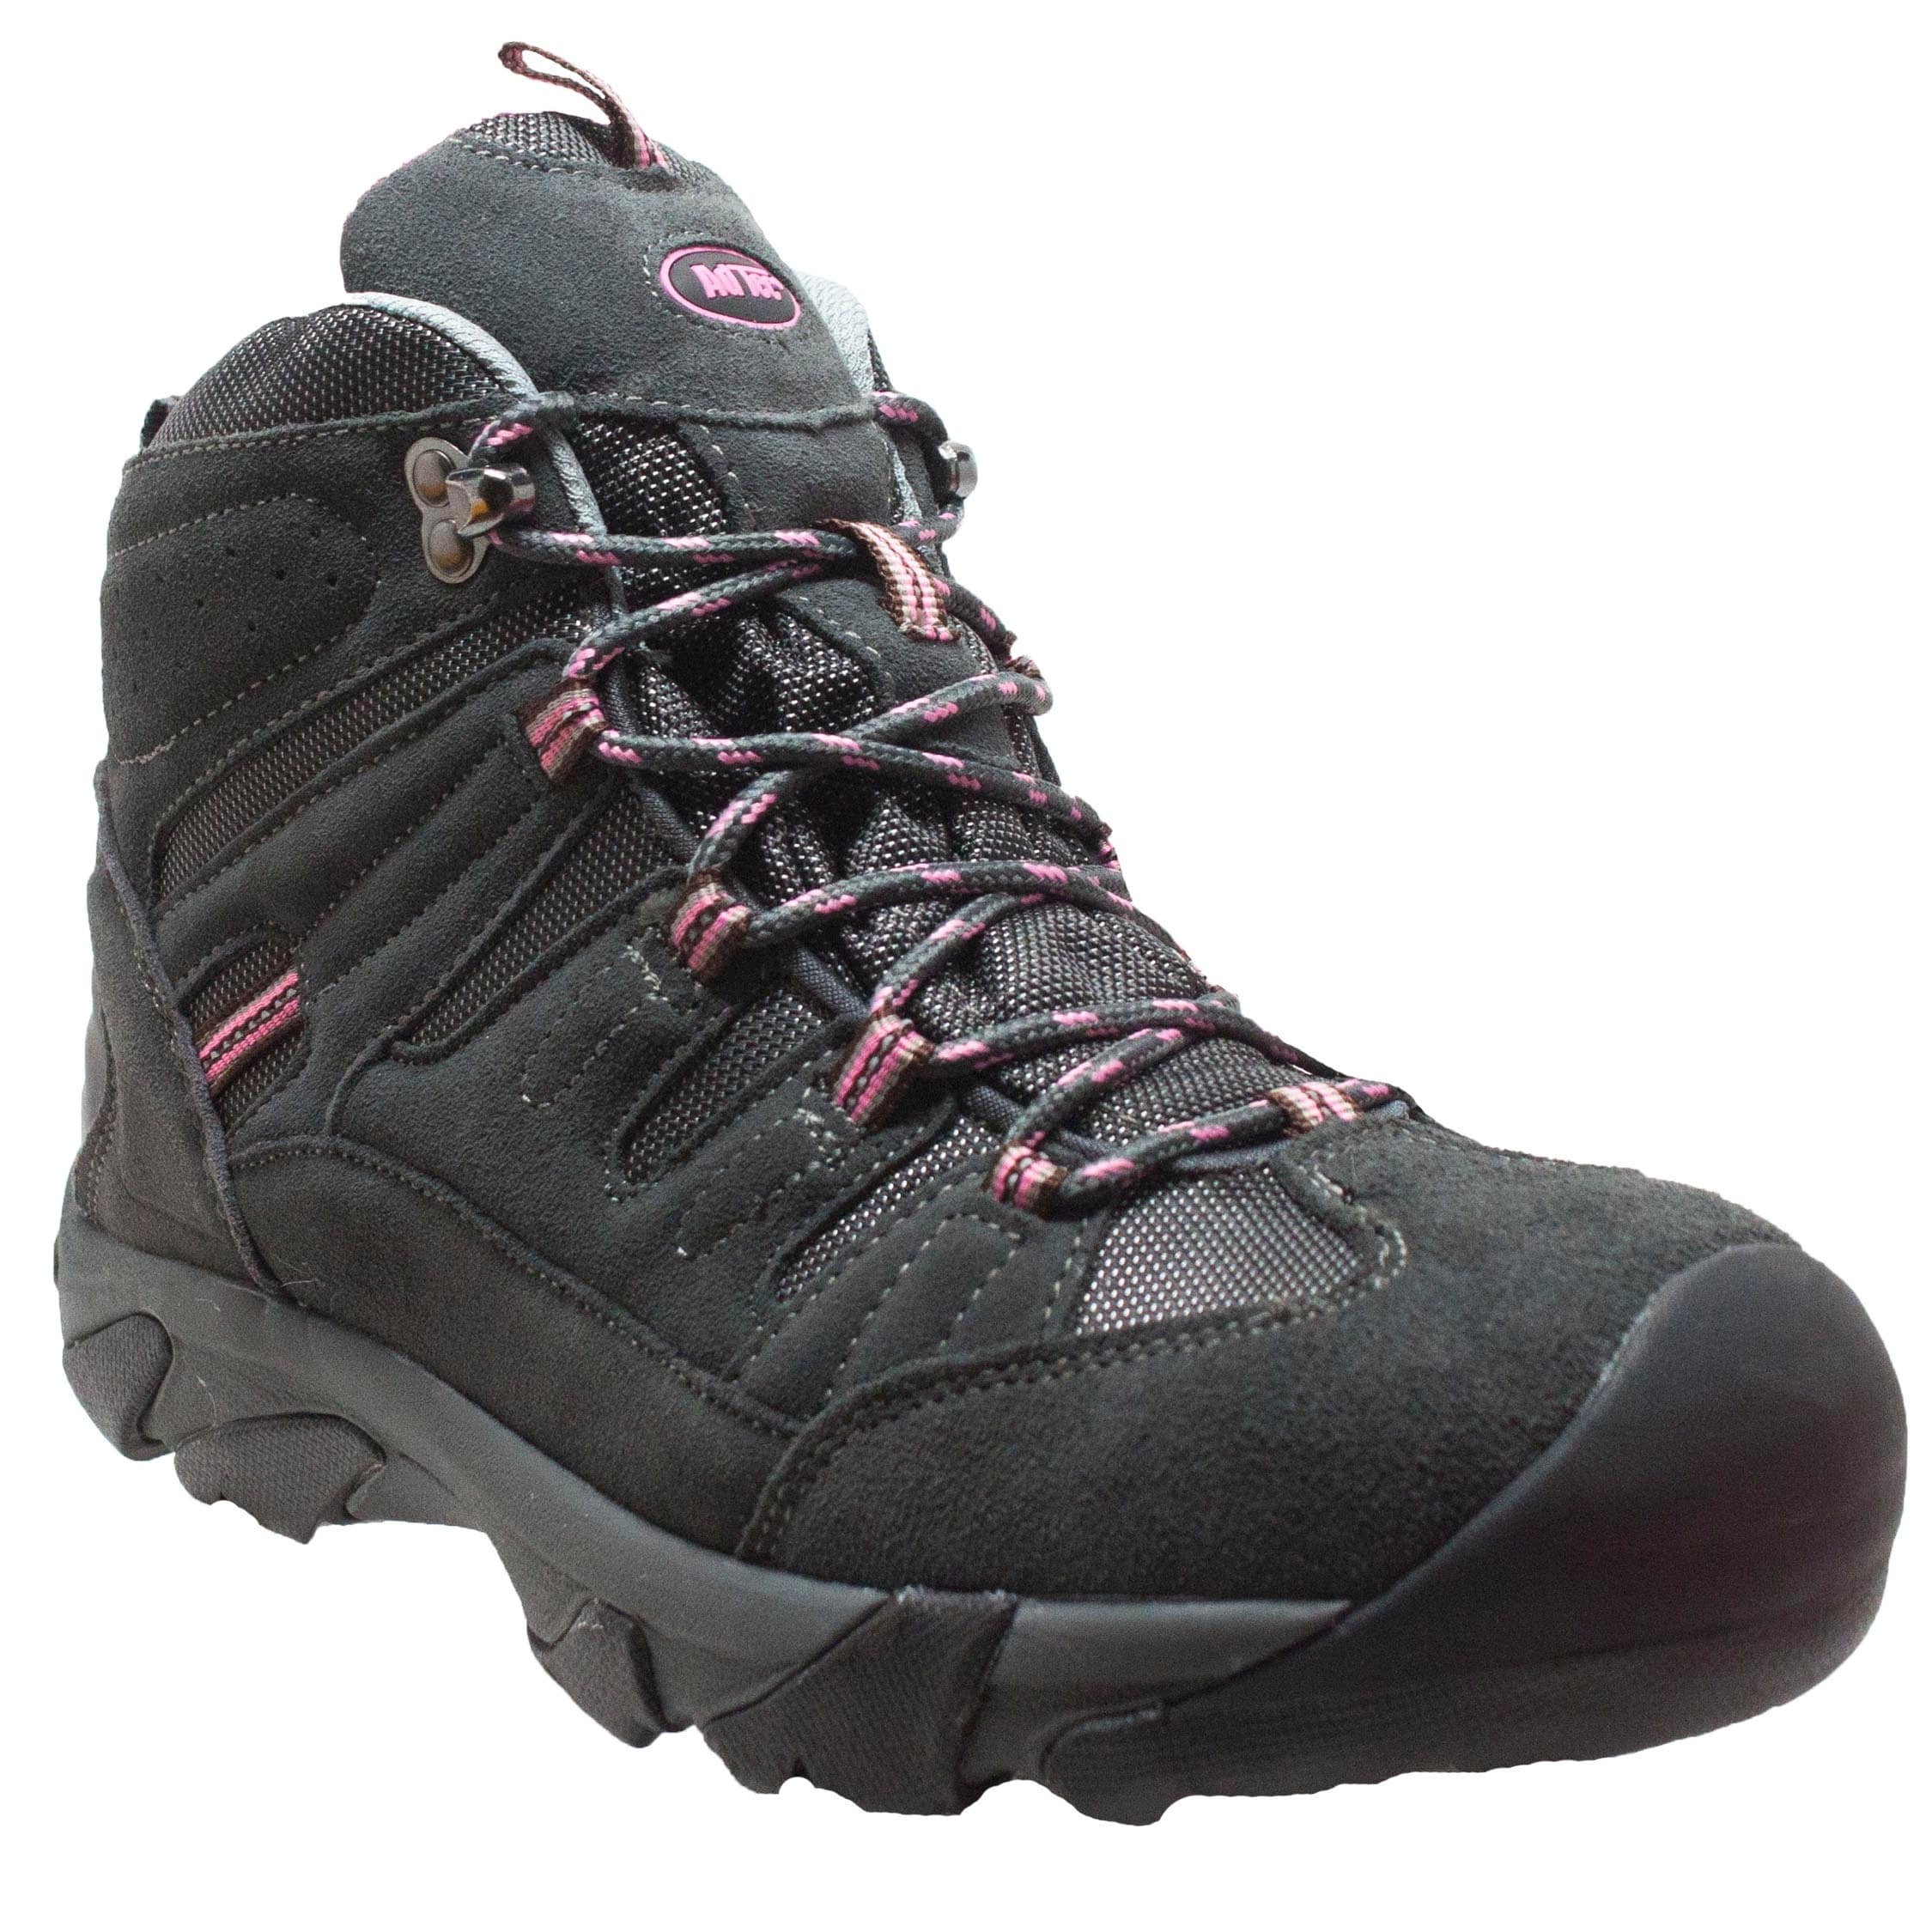 pink composite toe boots